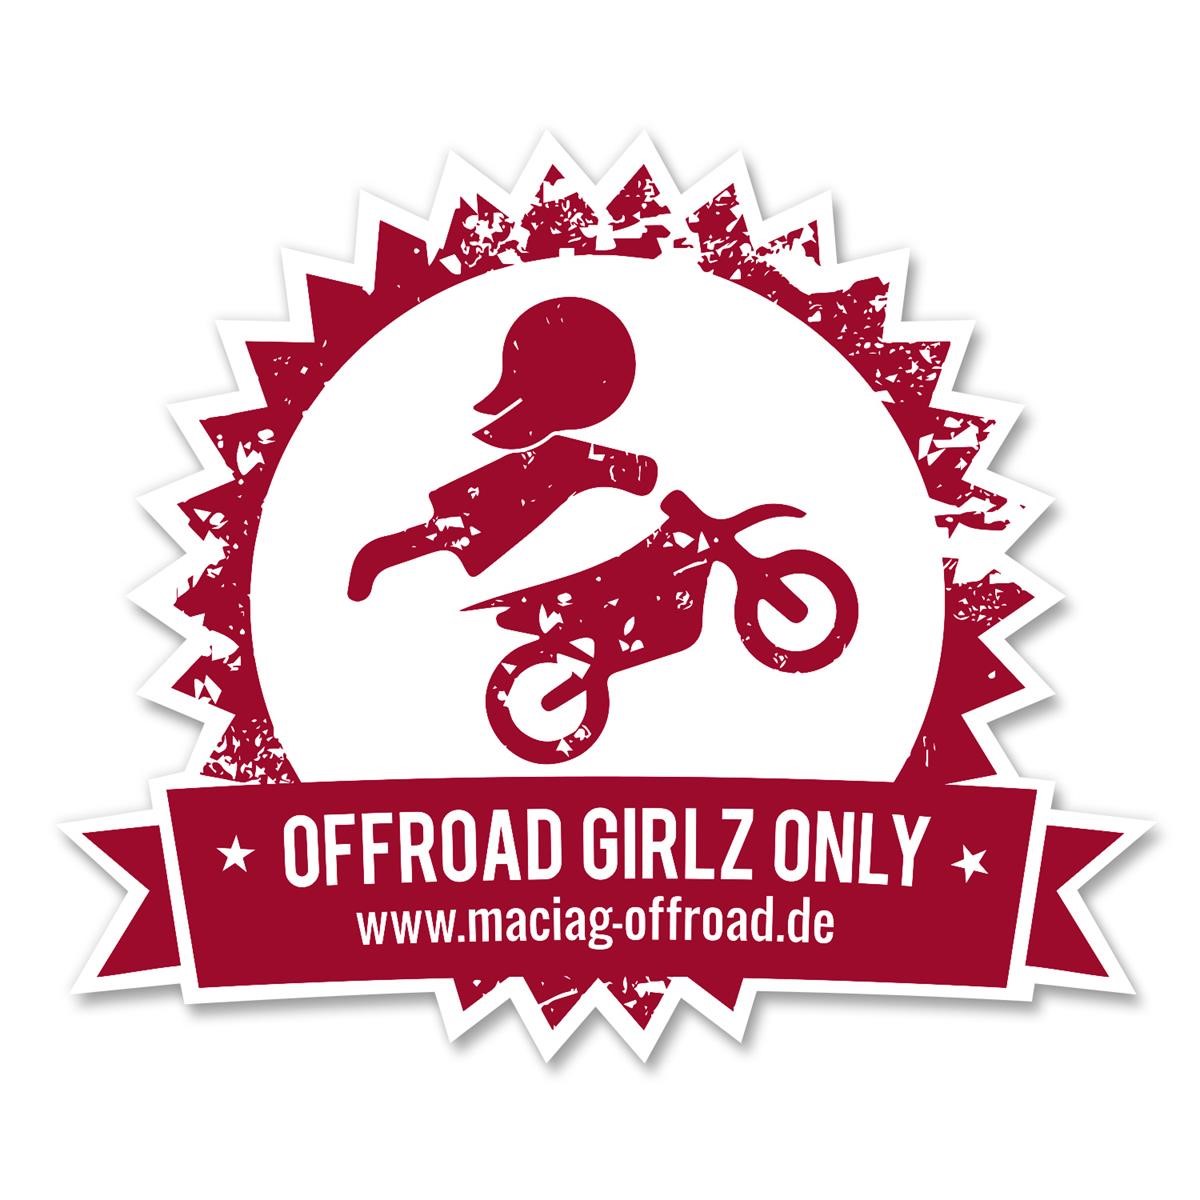 Maciag Offroad "Autocollant ""Offroad Girlz Only"""  Red - 4.5 cm